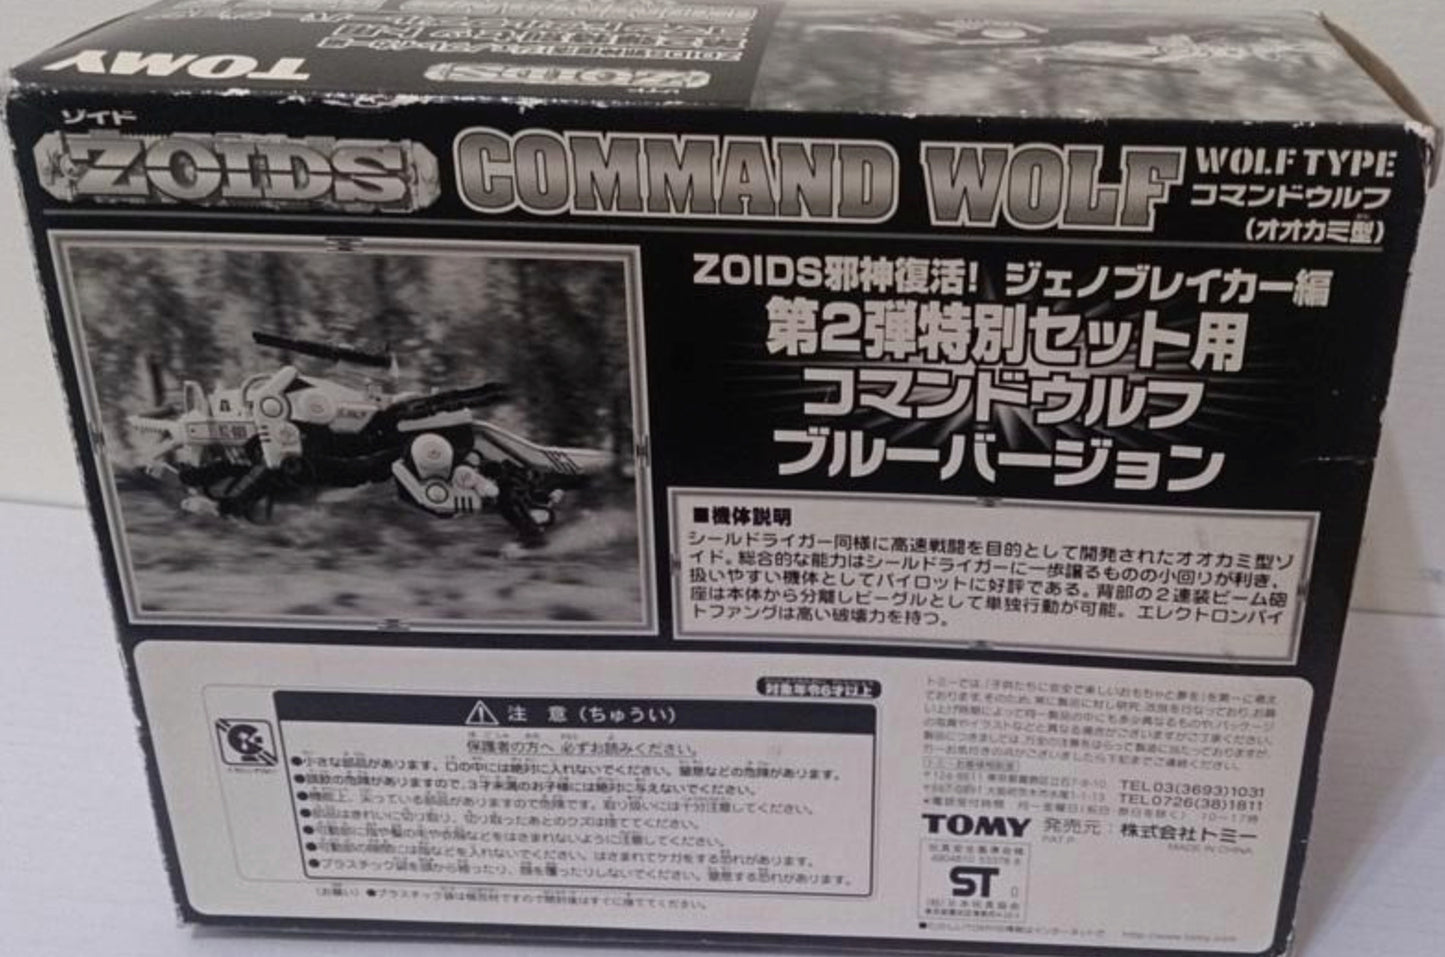 Tomy Zoids 1/72 Command Wolf Type GBA Game Boy Color Limited Model Kit Figure